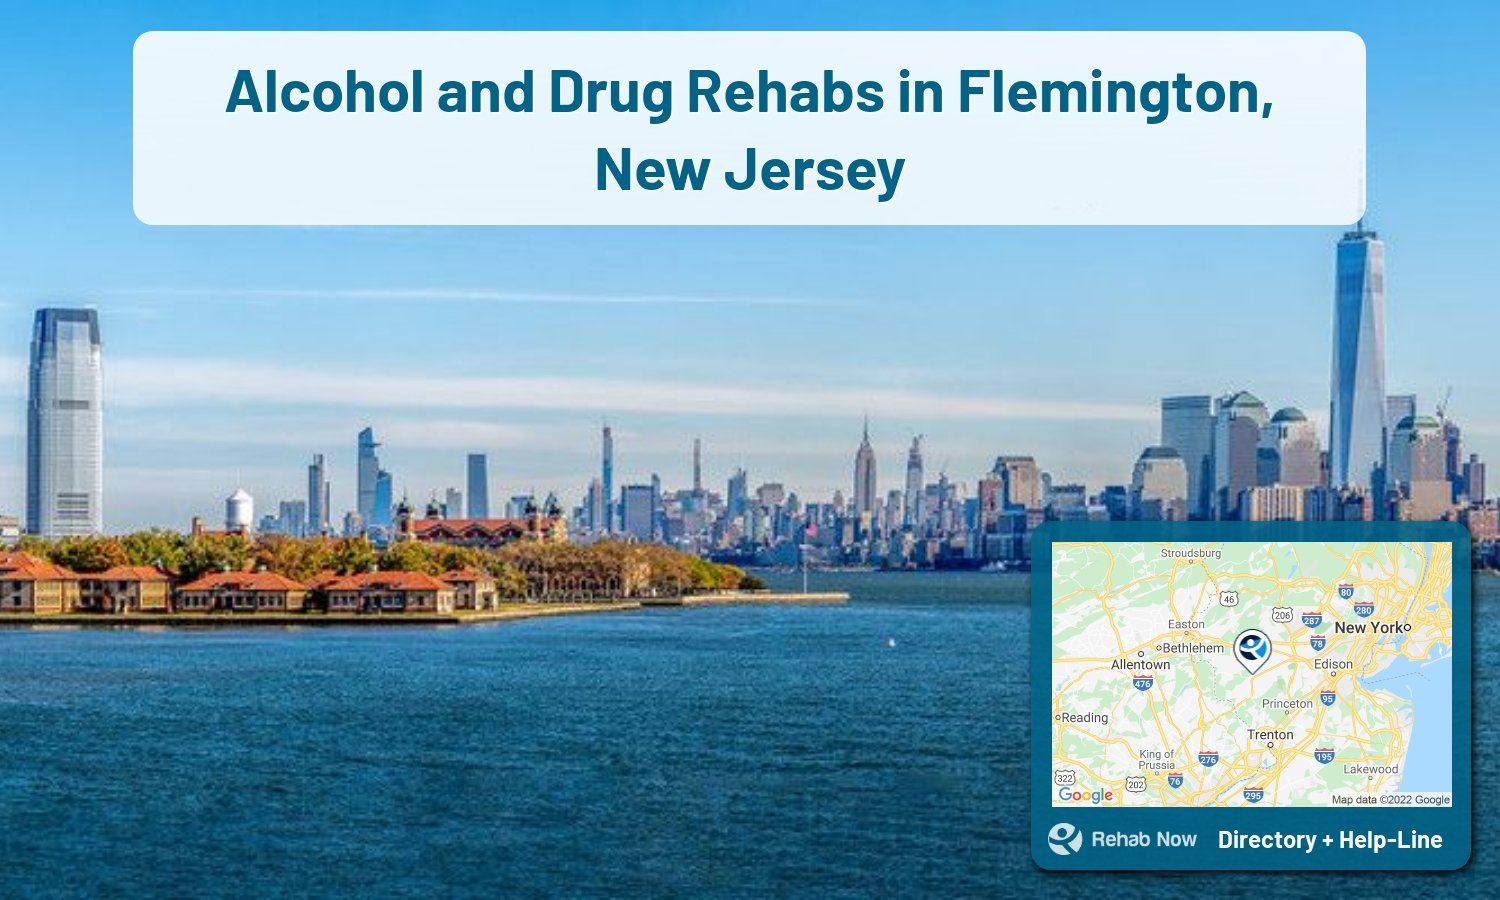 Flemington, NJ Treatment Centers. Find drug rehab in Flemington, New Jersey, or detox and treatment programs. Get the right help now!